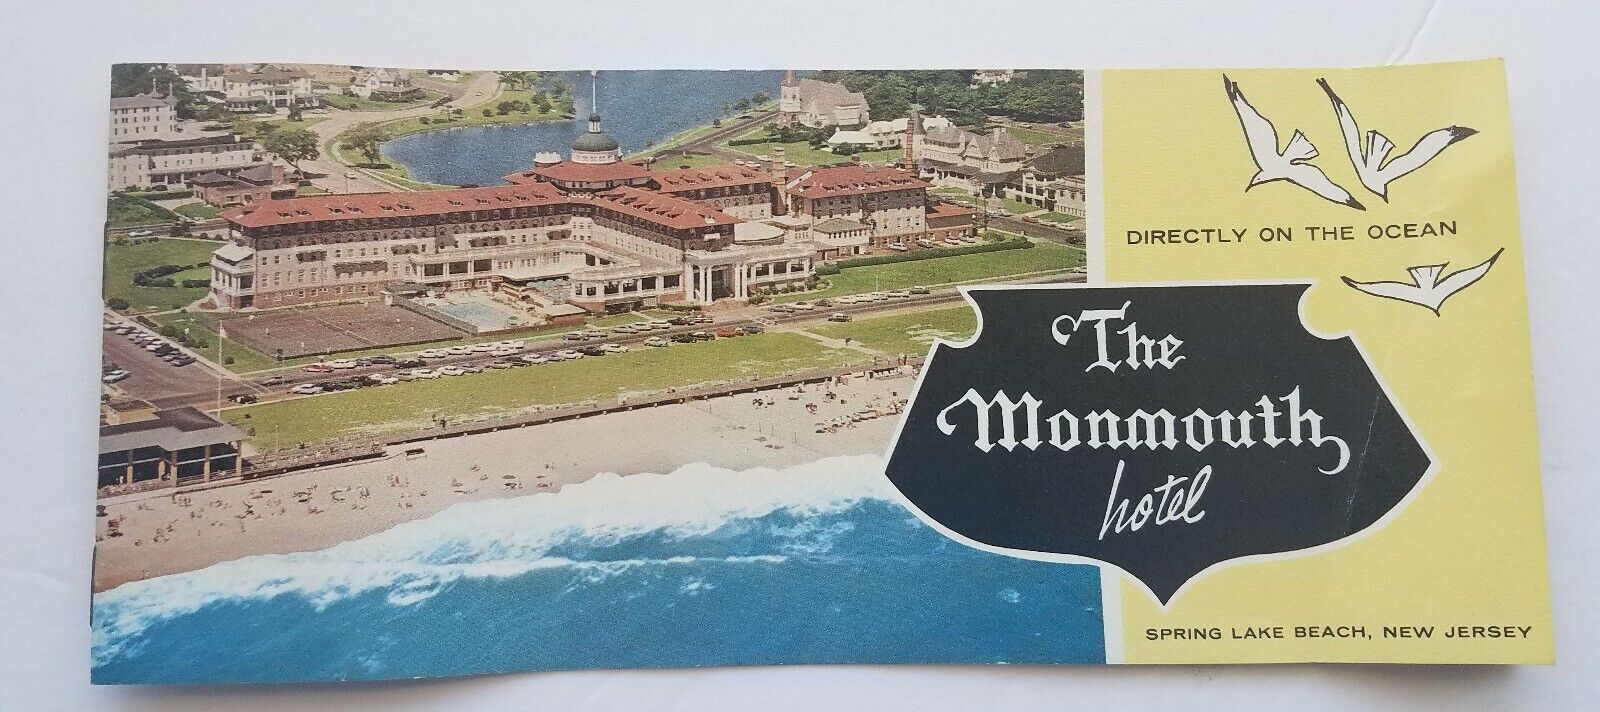 Vintage 1960s Monmouth Hotel In Spring Lake Beach, New Jersey Brochure Travel